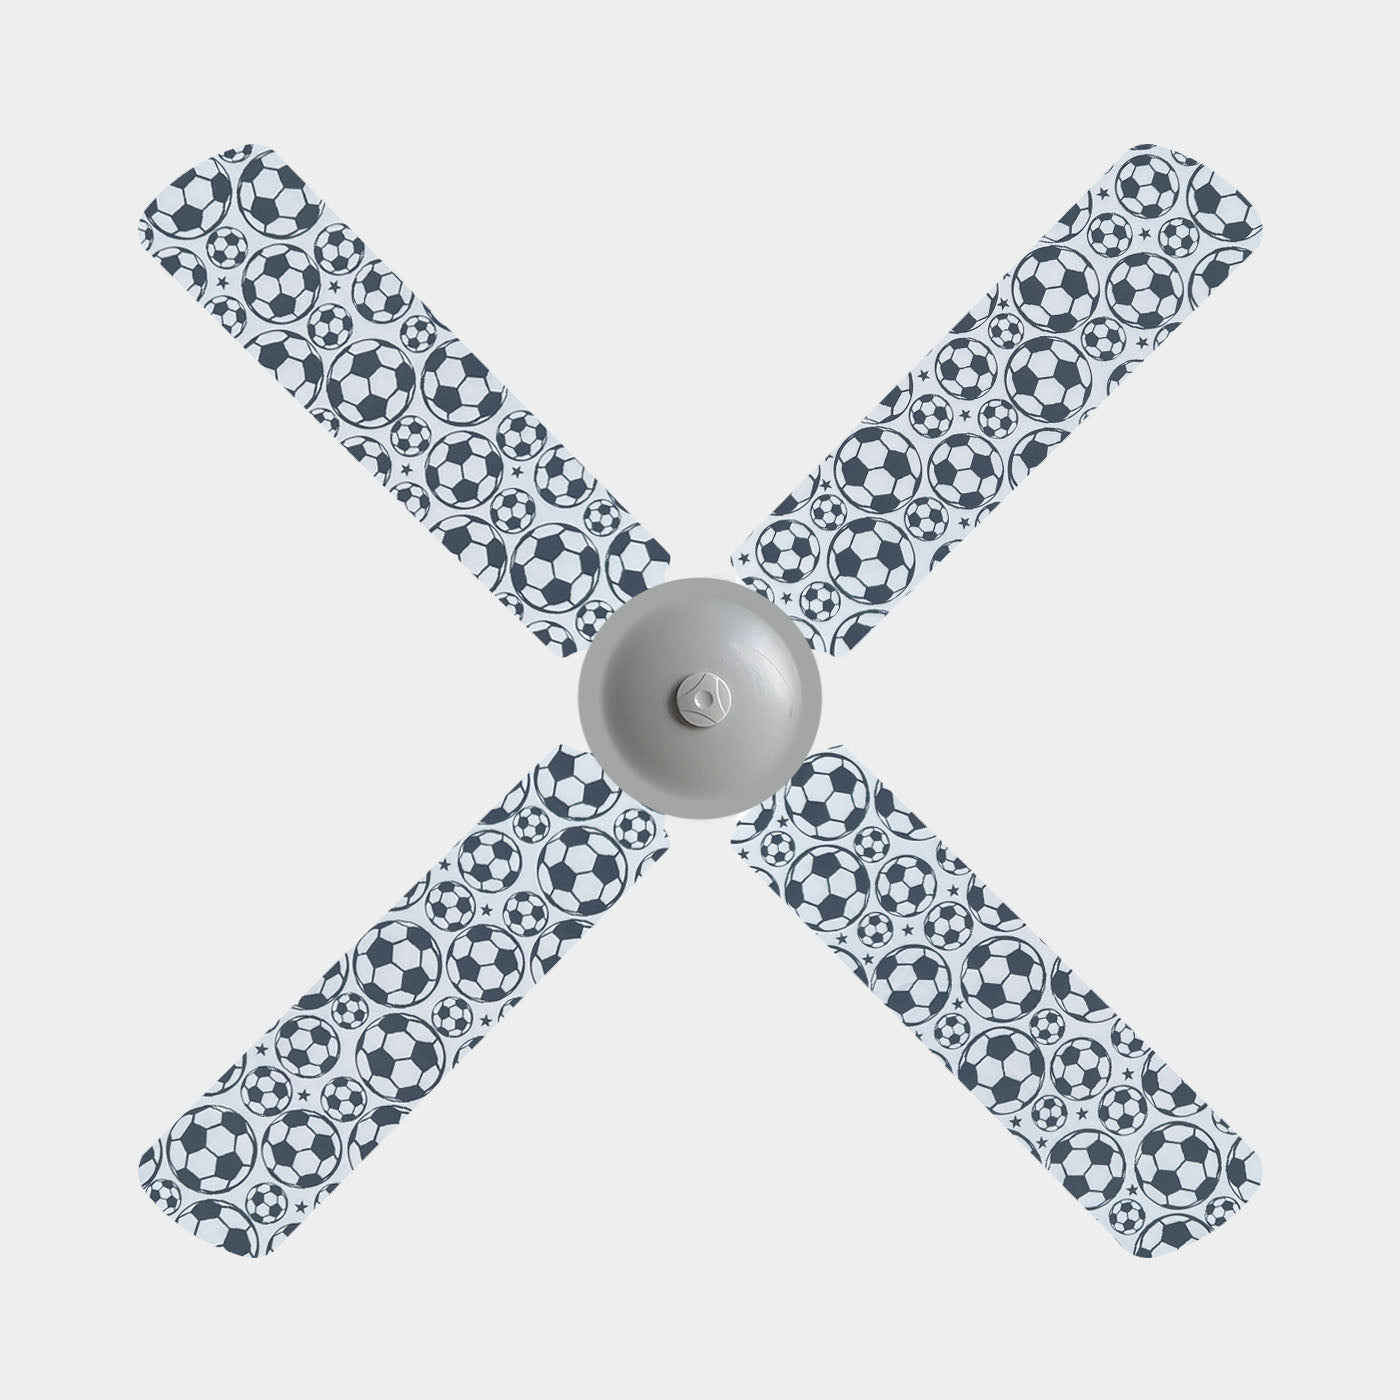 4 blade fan with a fabric cover with soccerballs footballs on a white background 